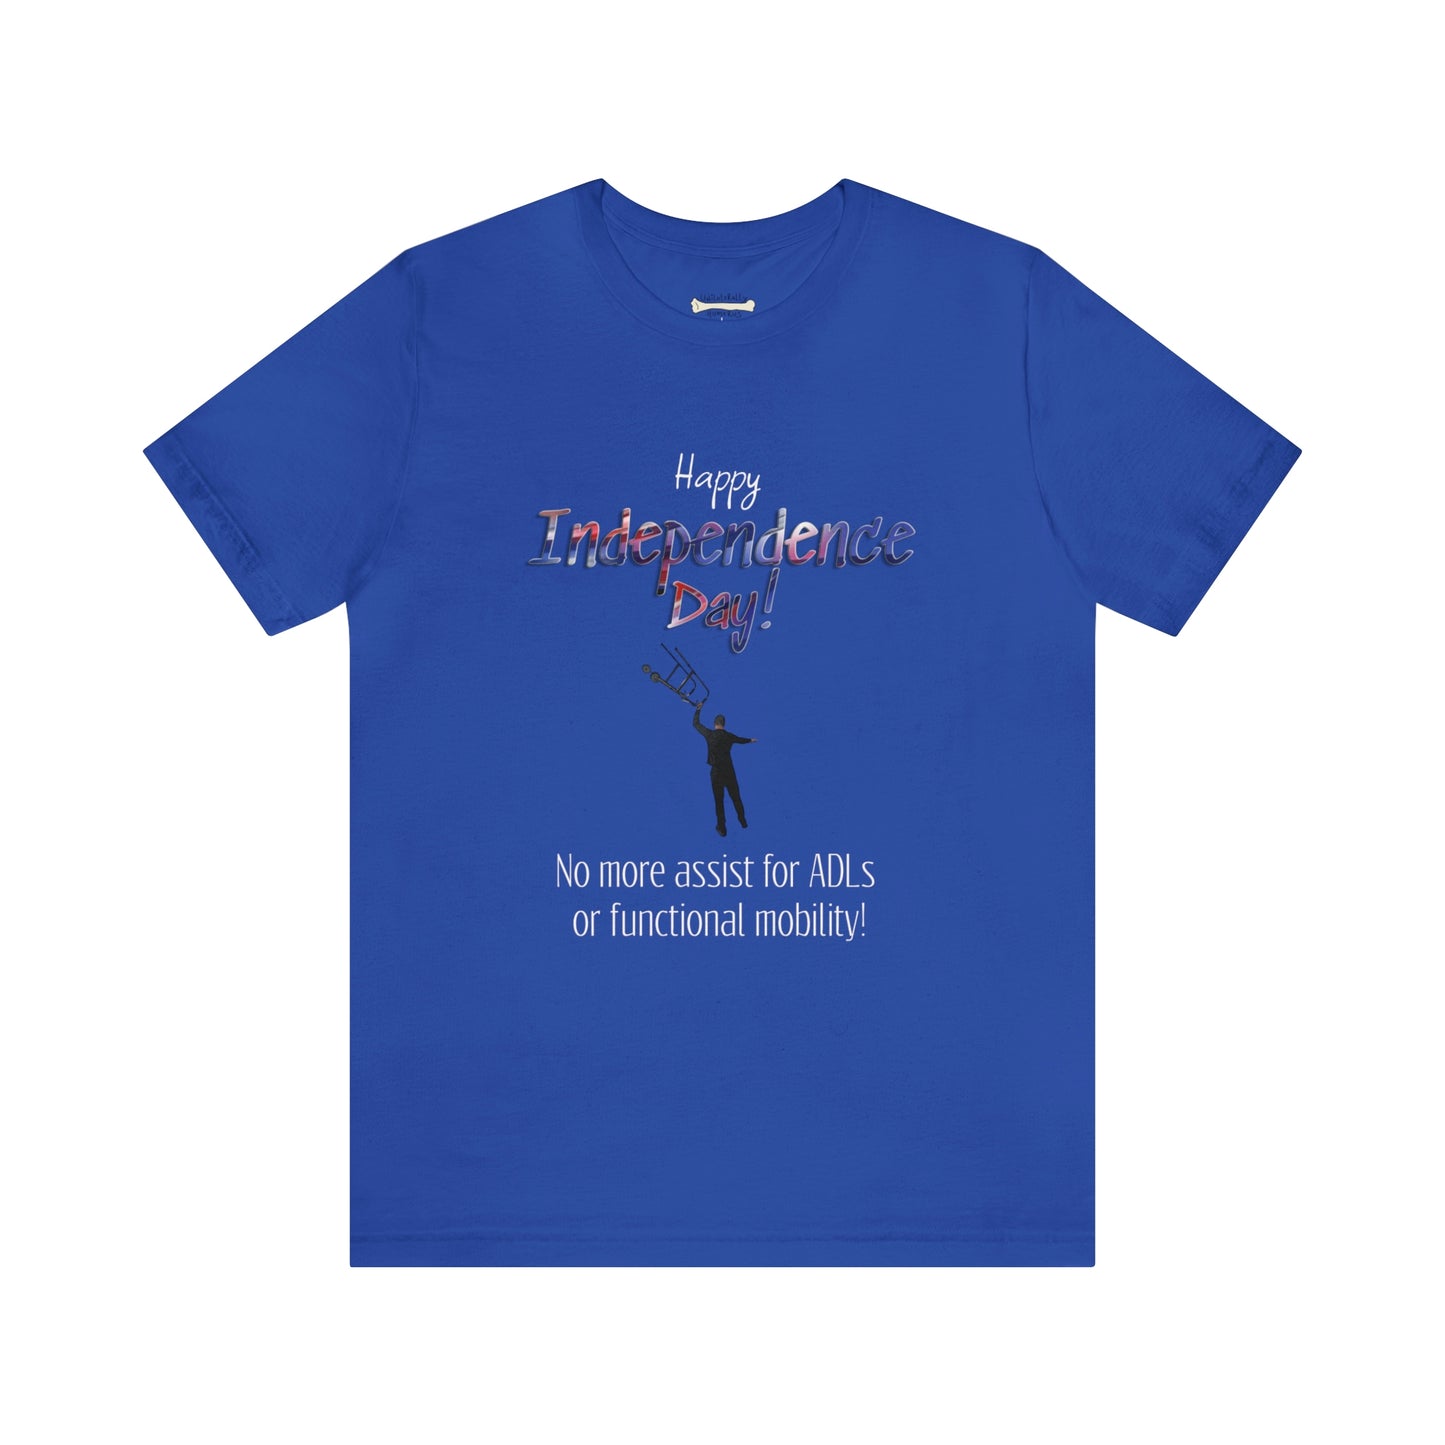 Happy Independence Day! Funny Occupational Therapy/Physical Therapy Shirt! Unisex Jersey Short Sleeve Tee